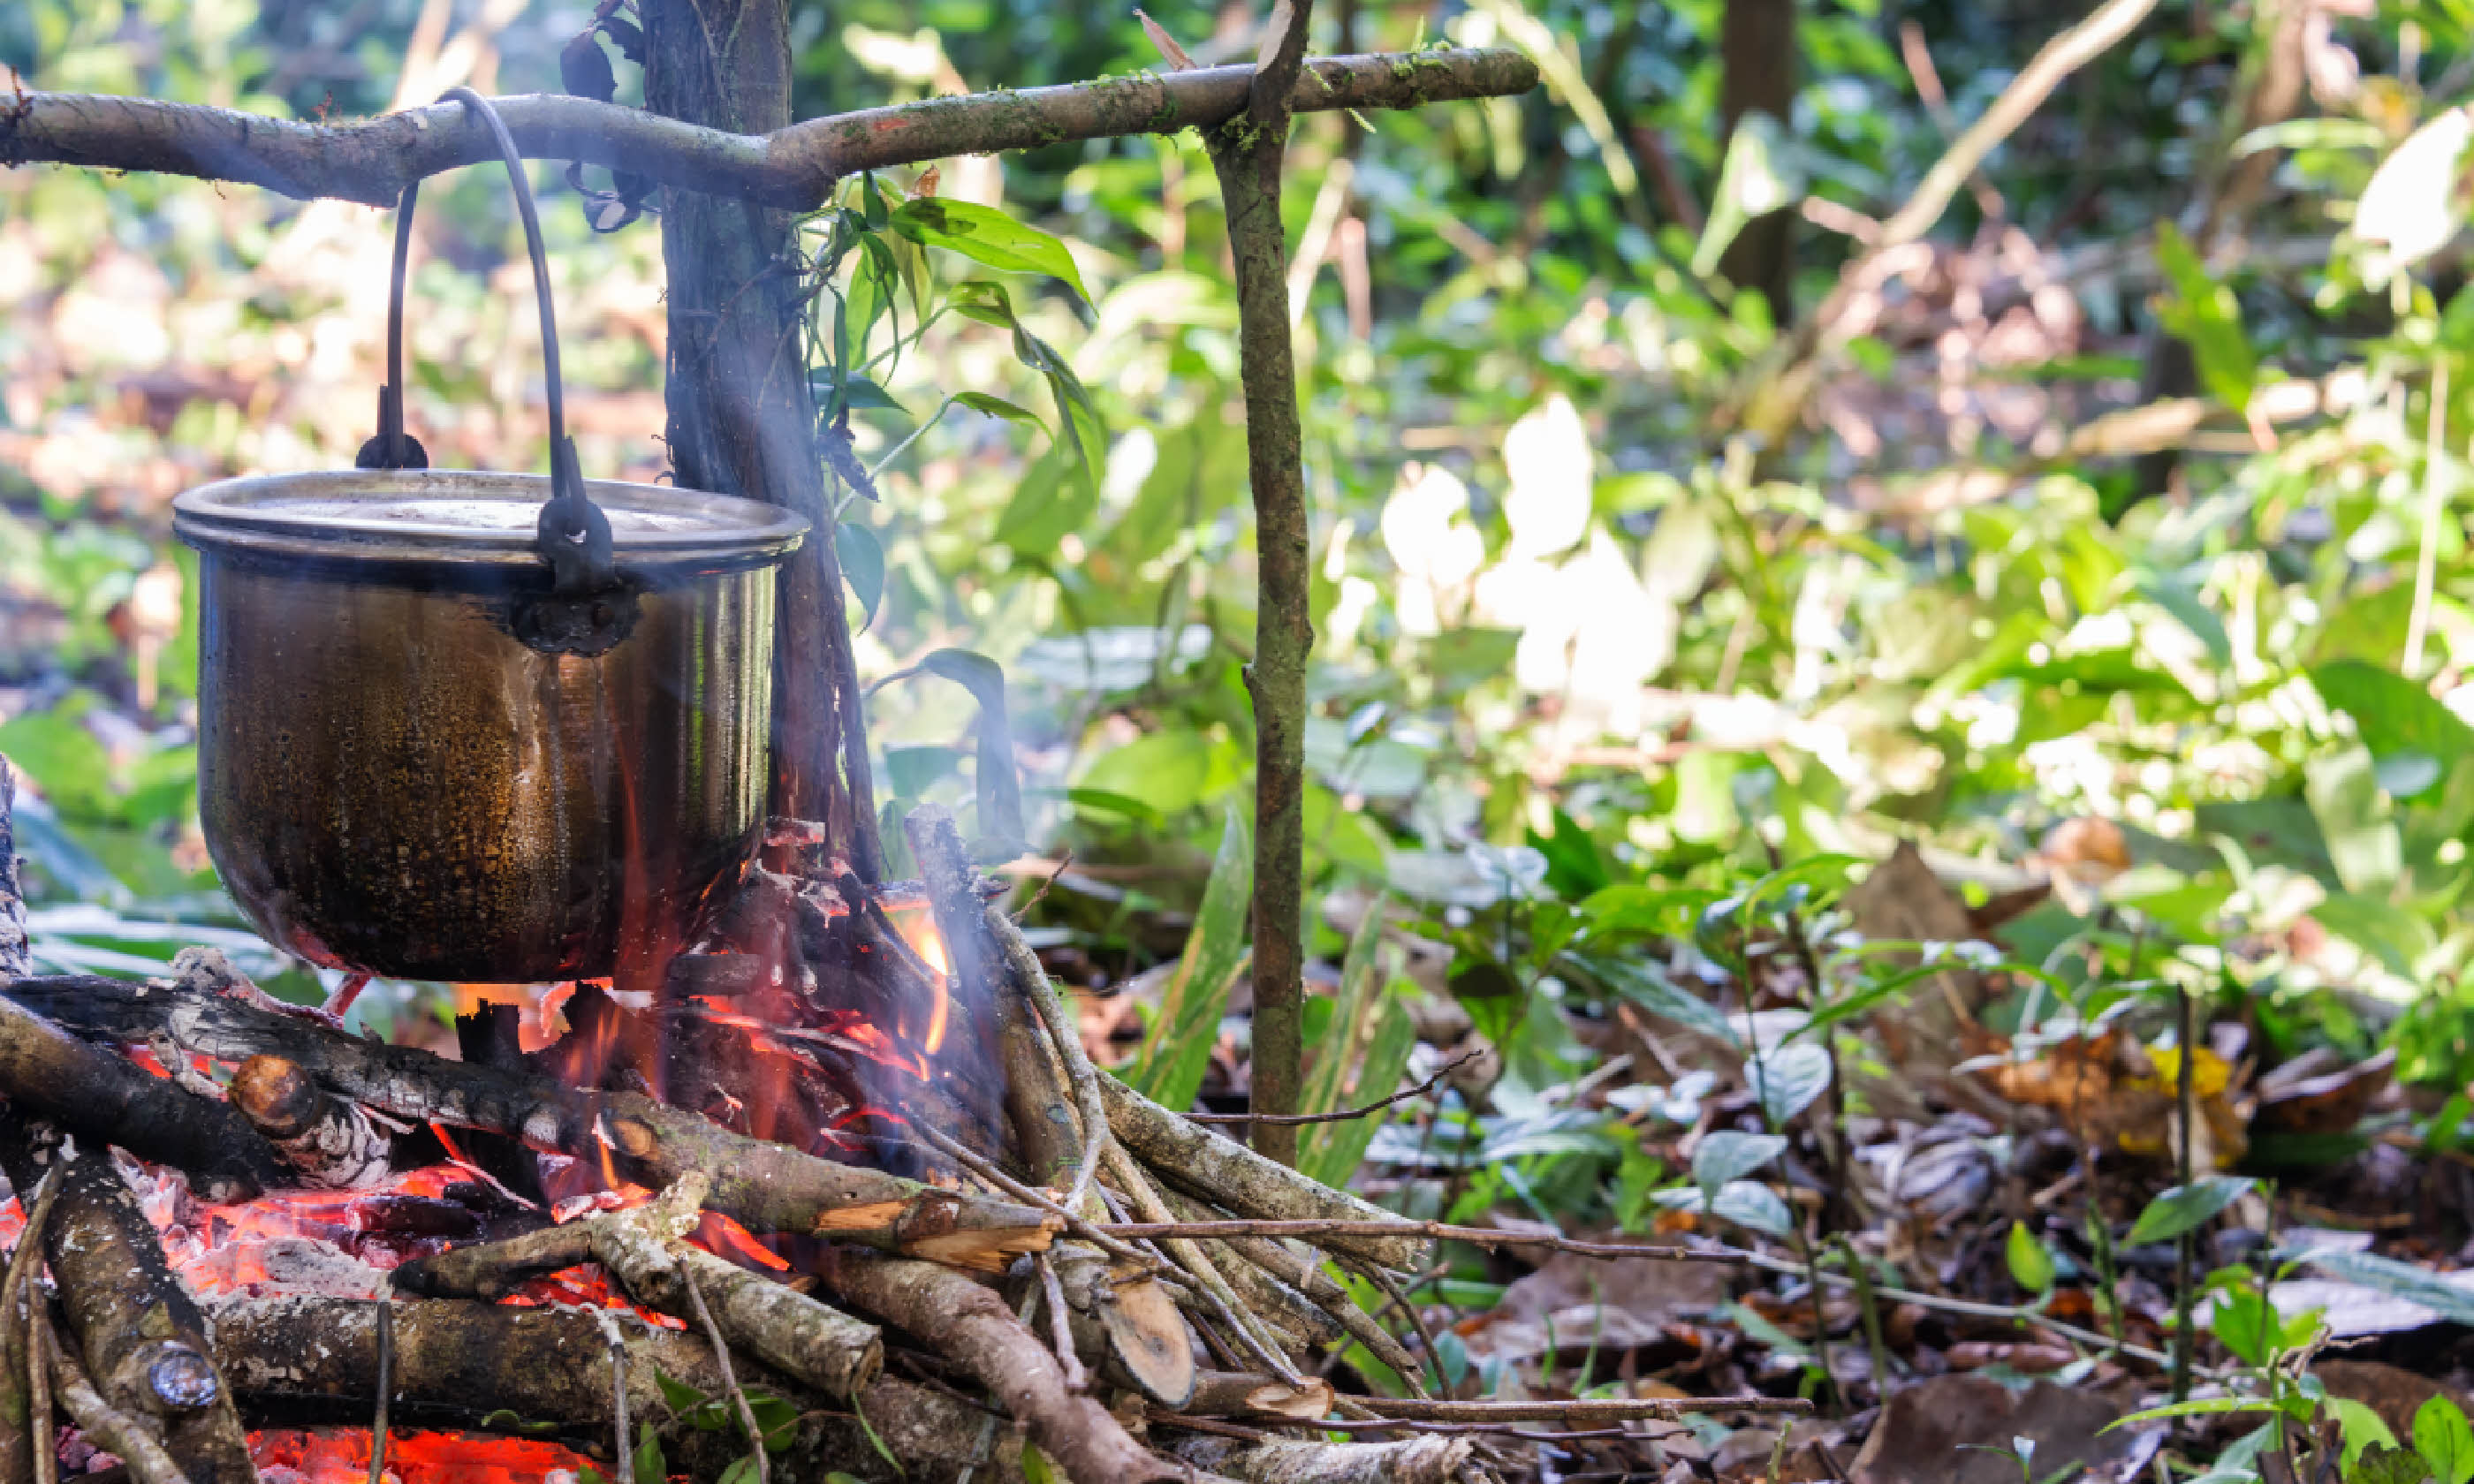 Cooking in the Amazon rainforest (Shutterstock)